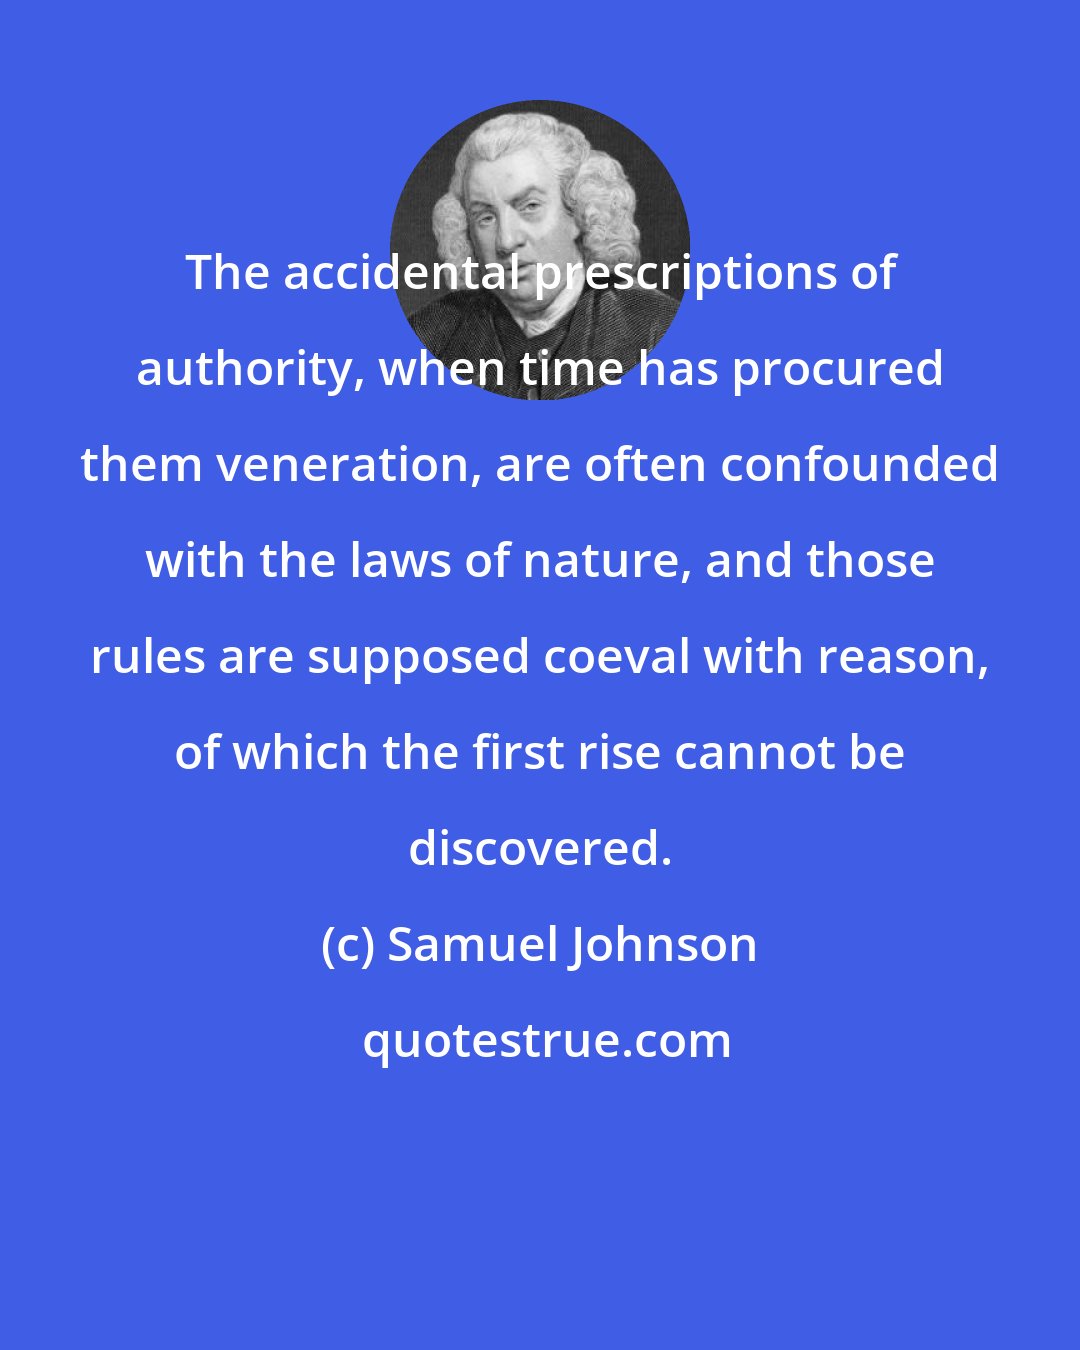 Samuel Johnson: The accidental prescriptions of authority, when time has procured them veneration, are often confounded with the laws of nature, and those rules are supposed coeval with reason, of which the first rise cannot be discovered.